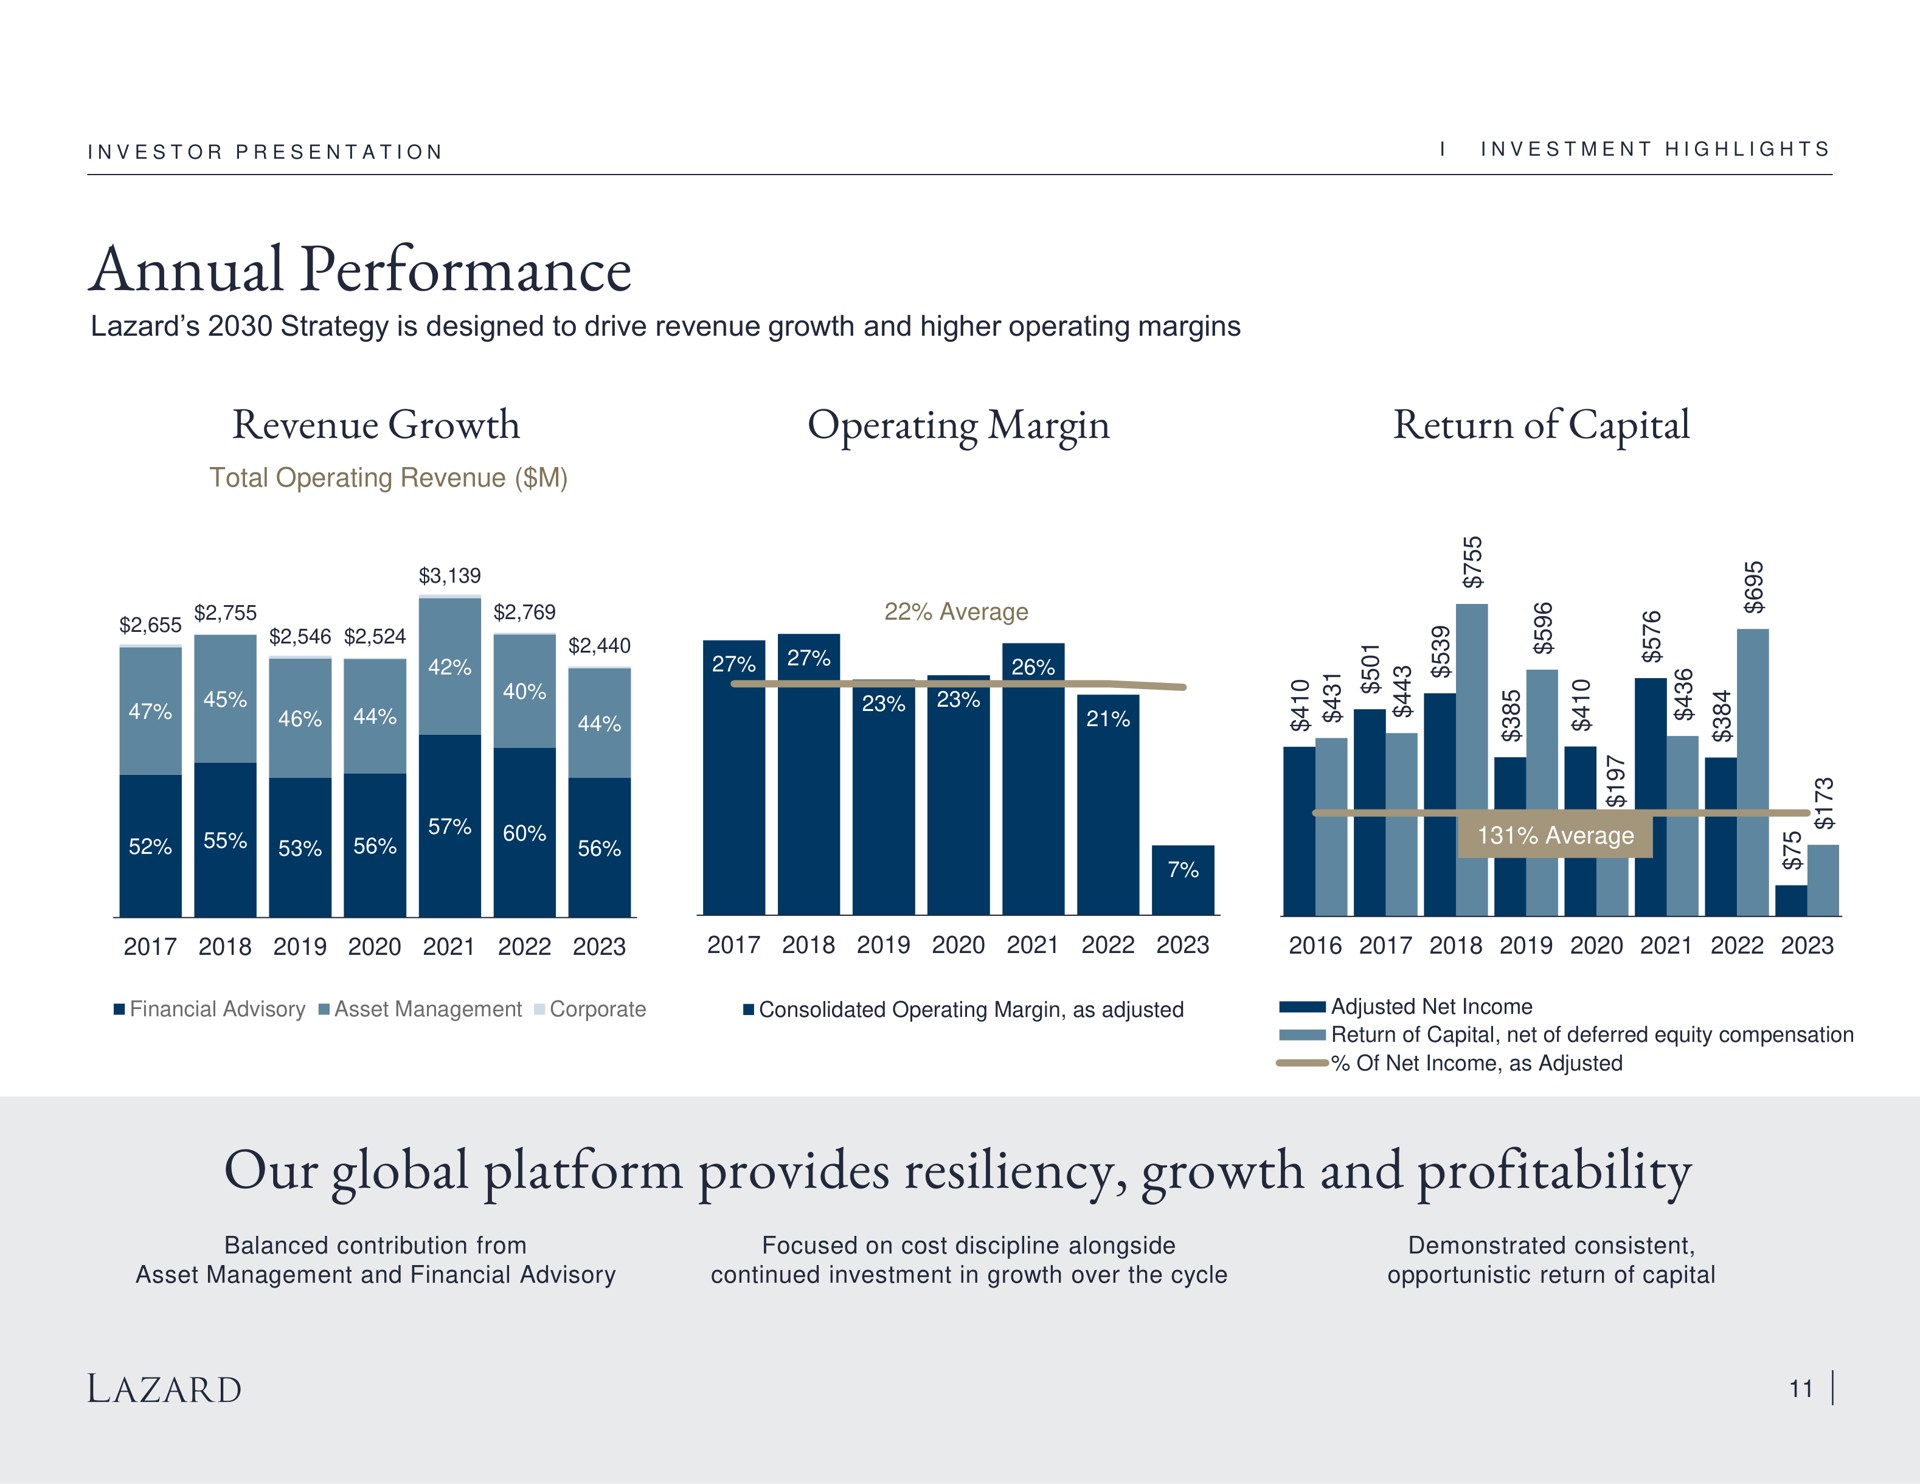 annual performance revenue growth operating margin return of capital our global platform provides resiliency growth and profitability | Lazard